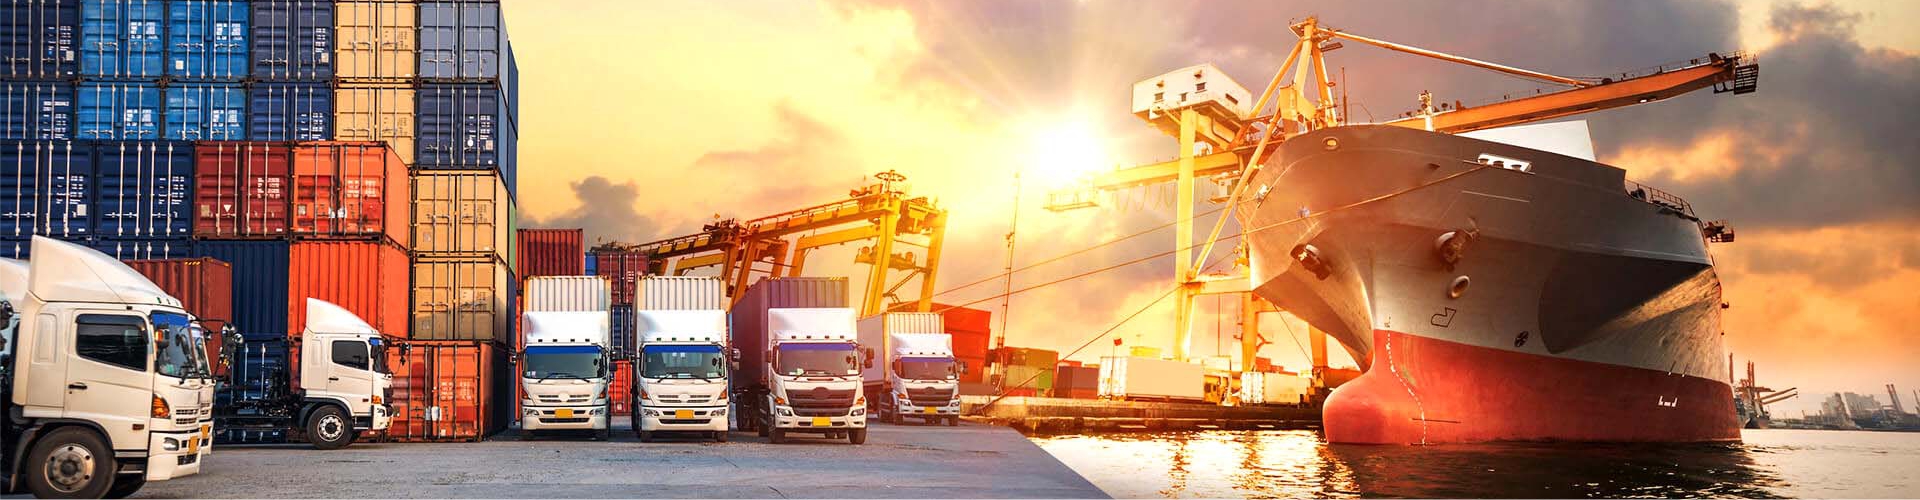 TRANSPORT AND LOGISTICS INDUSTRY CERTIFICATION